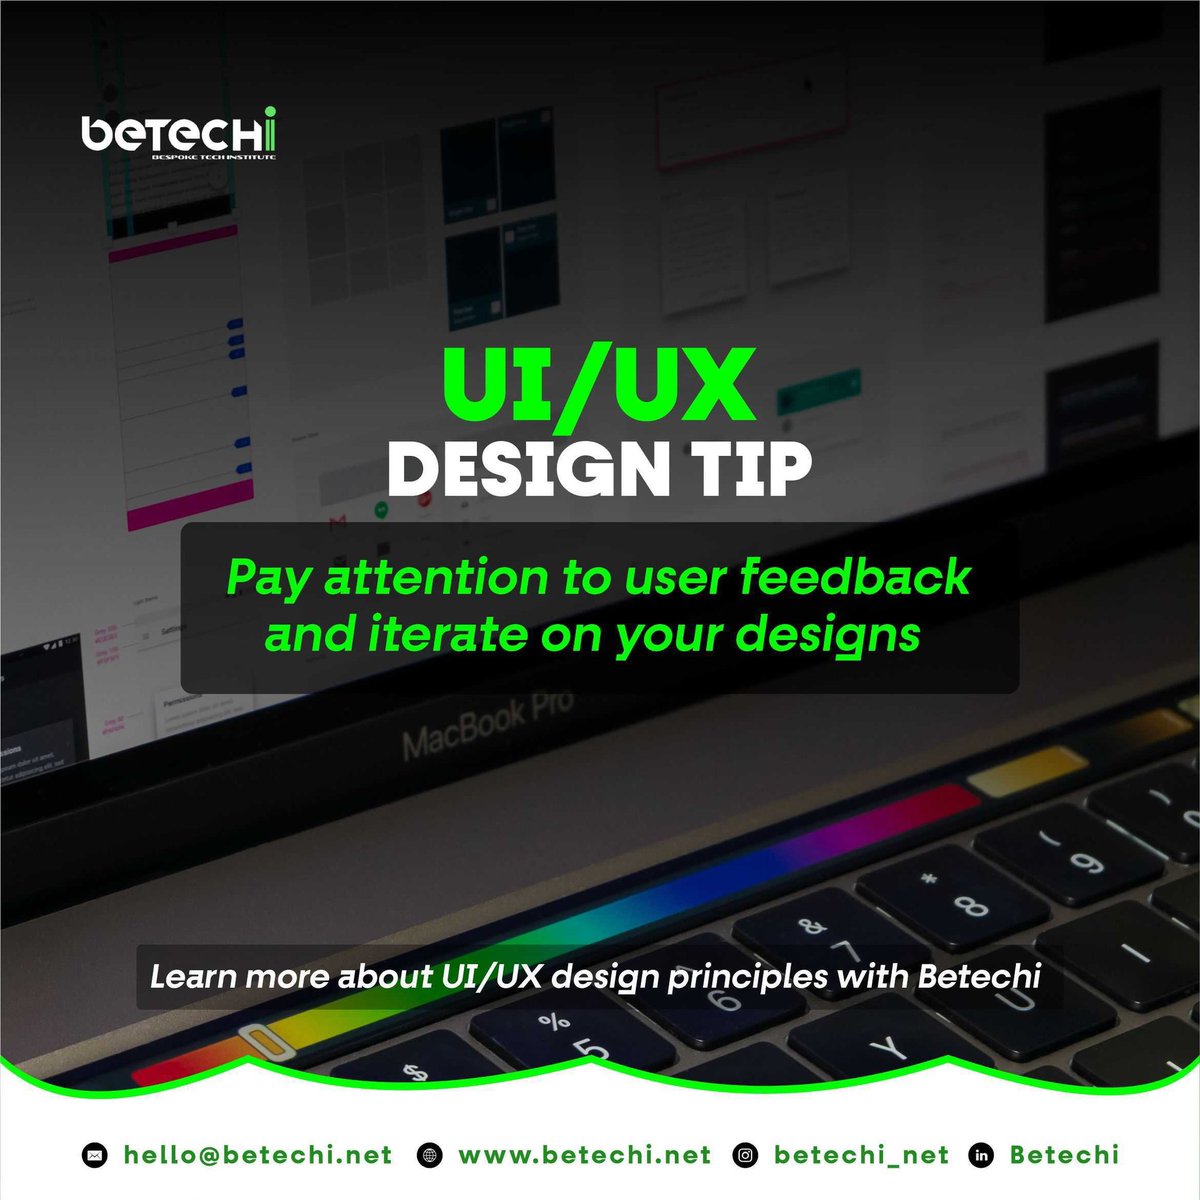 Great designs are built on user feedback. 
At Betechi, we teach you how to create user-centric designs that meet users' needs and expectations. 

You can learn the best practices now with BETECHI💡

 #DesignTips #Betechi #ui #UIDesign #UXDesign #ux #usercentereddesign #cul